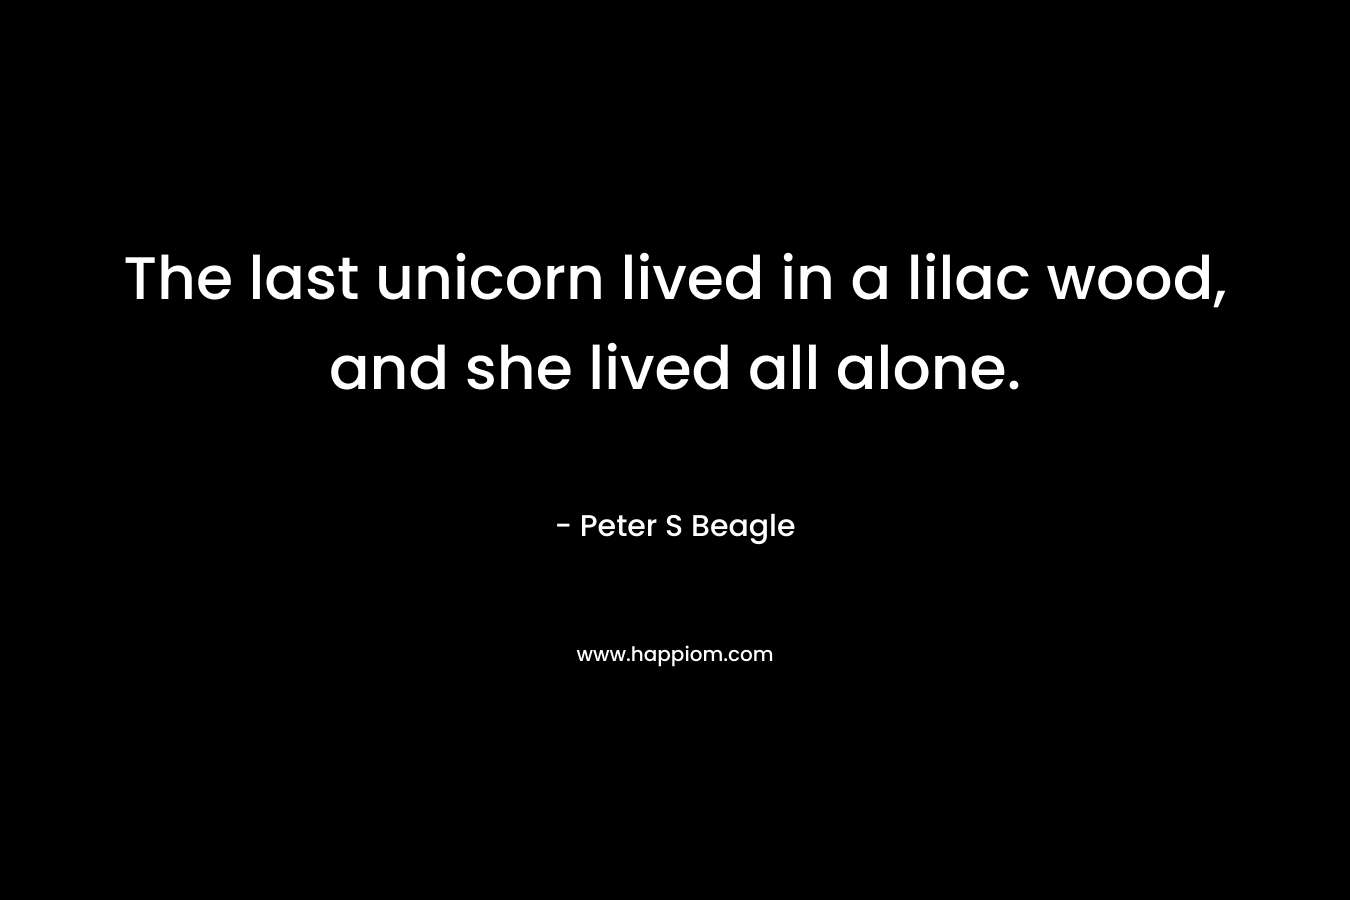 The last unicorn lived in a lilac wood, and she lived all alone. – Peter S Beagle